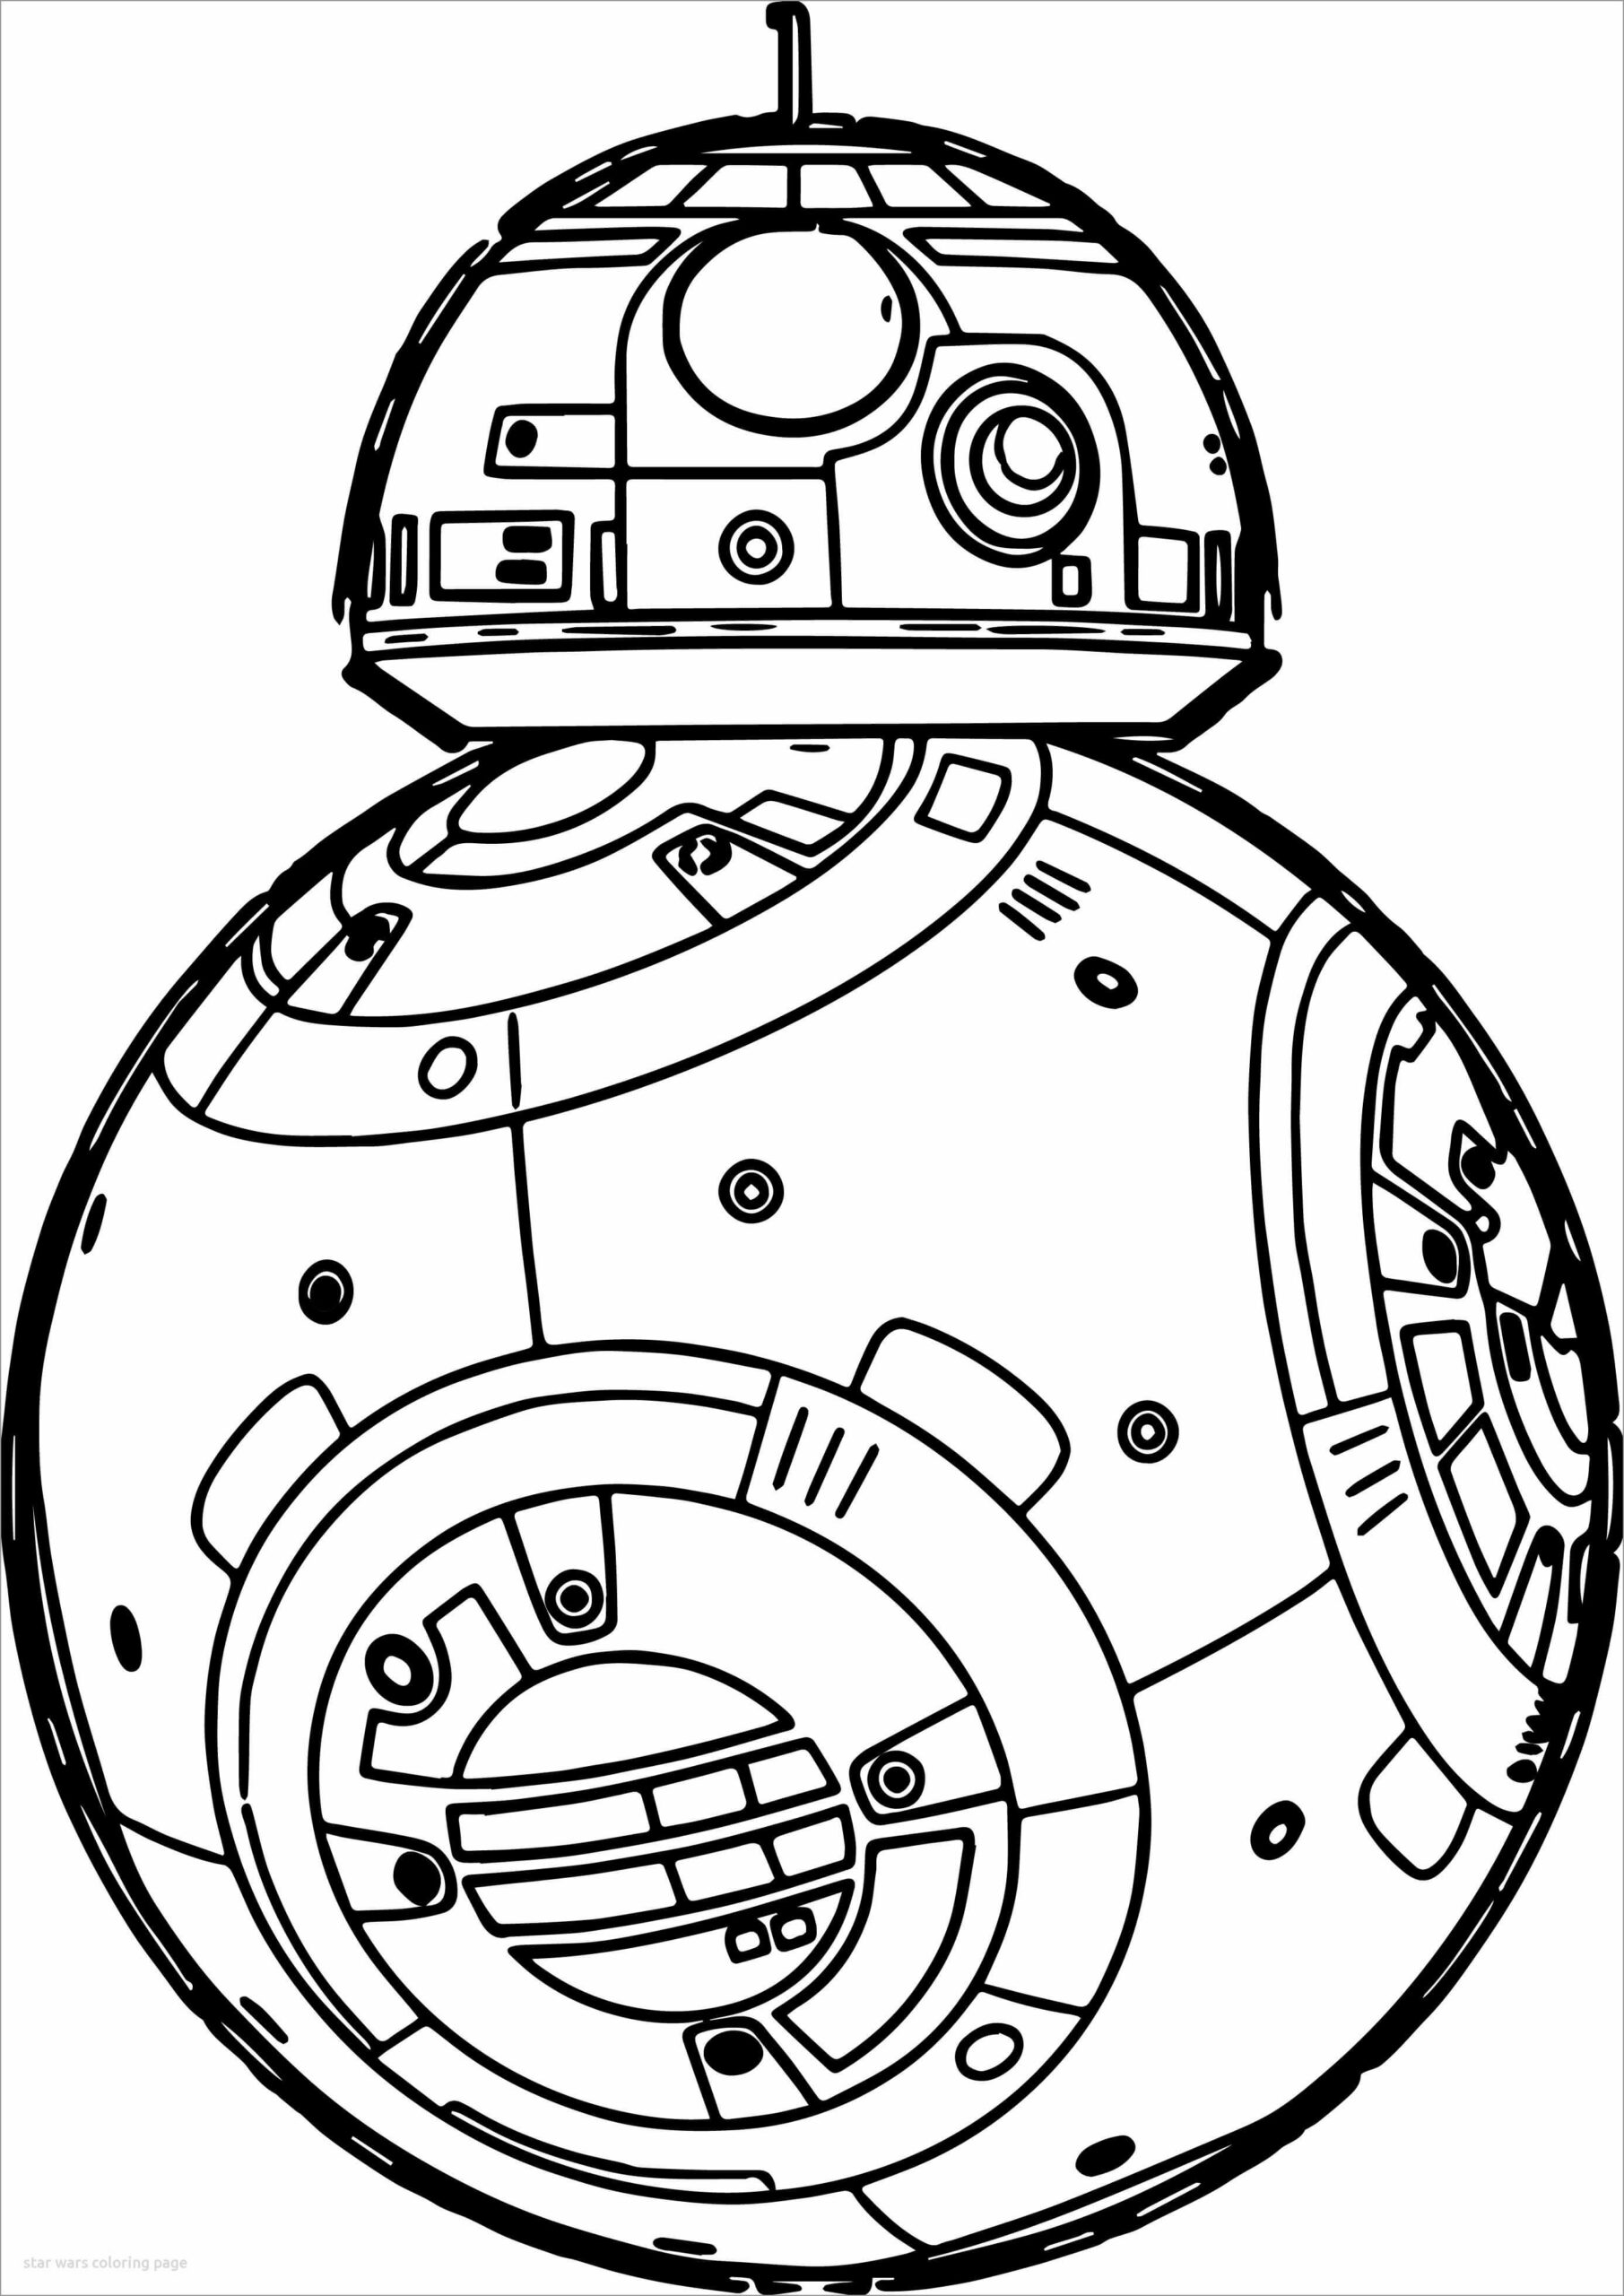 BB-8 Star Wars coloring page